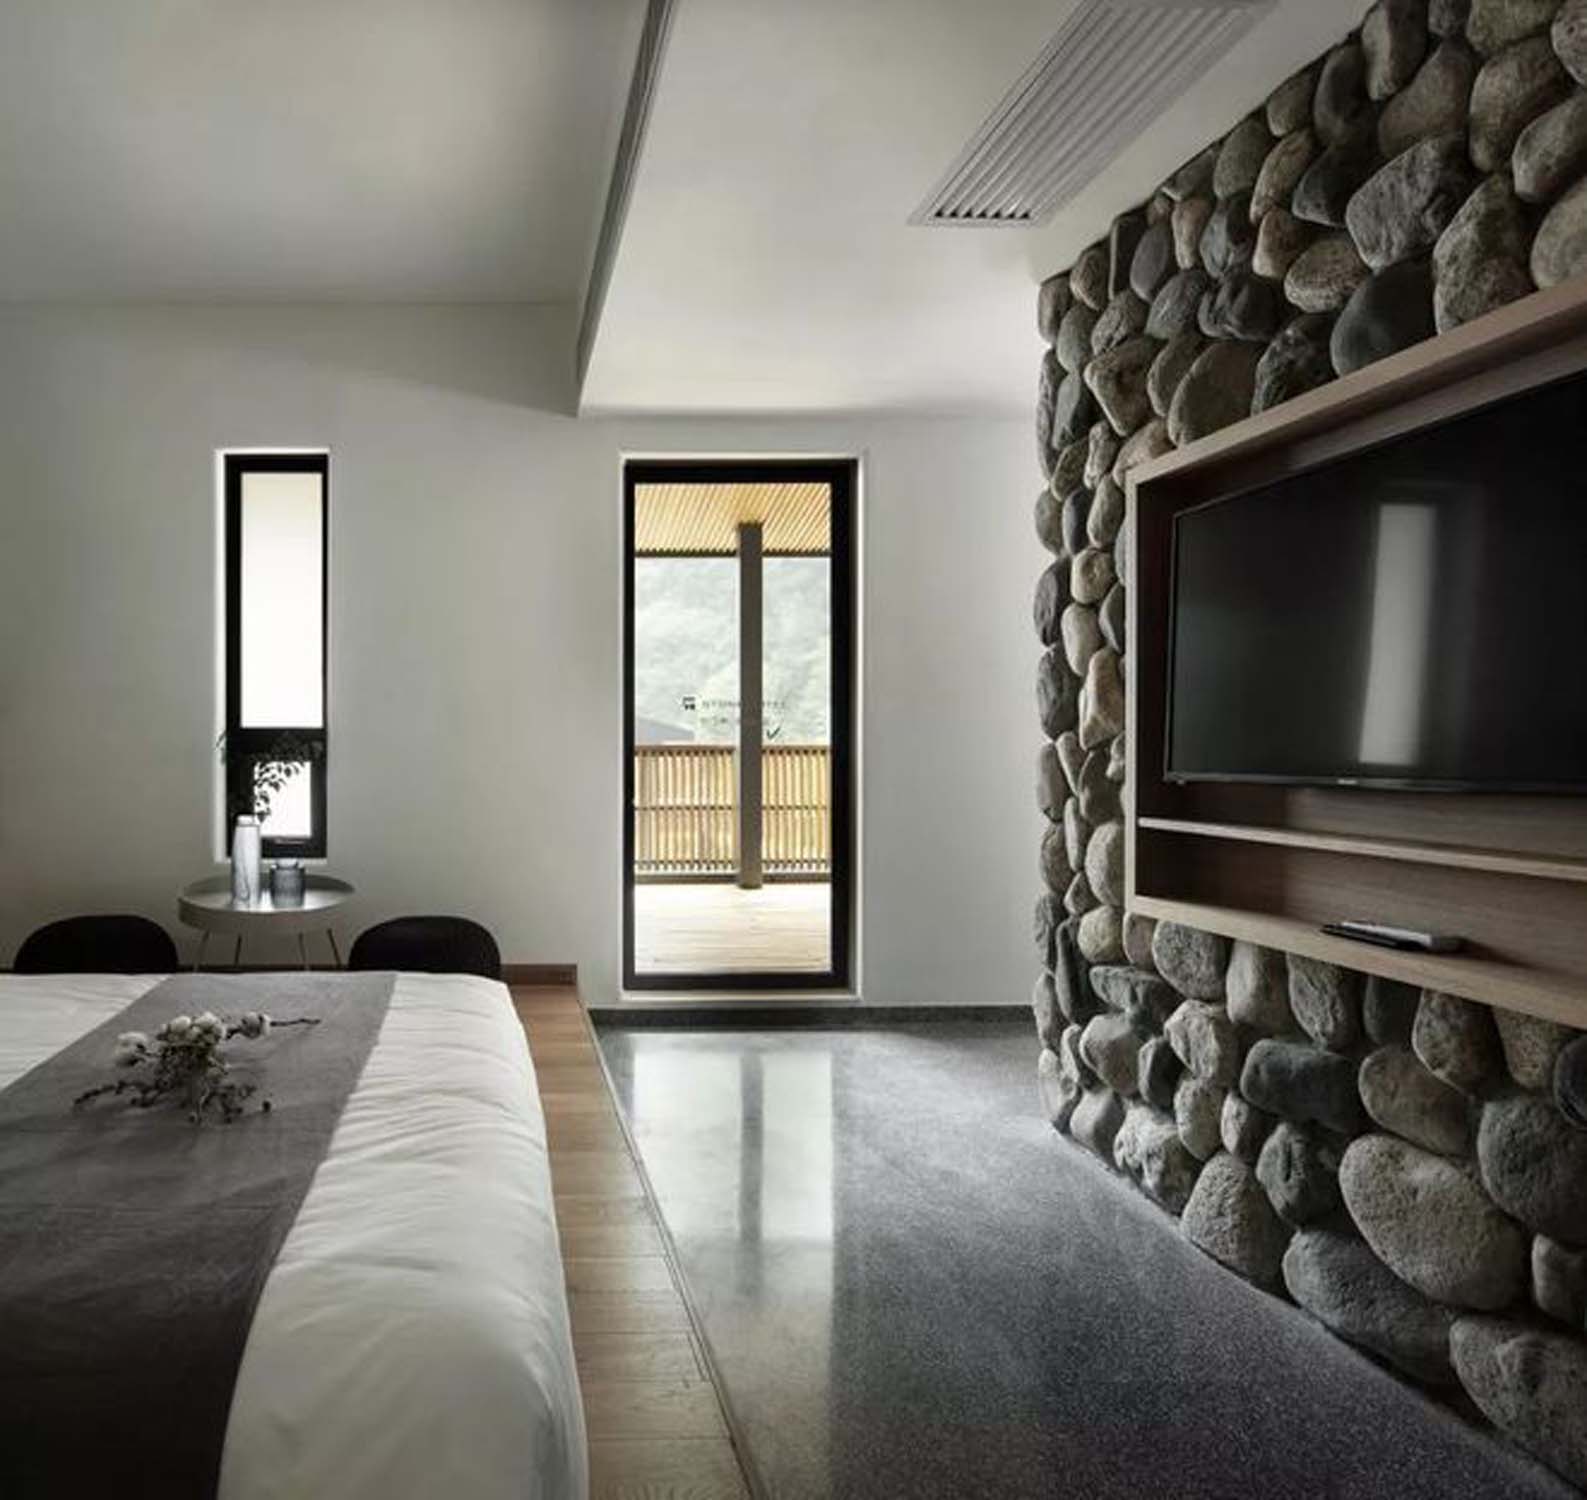 Guest room design of Home Stay Hotel